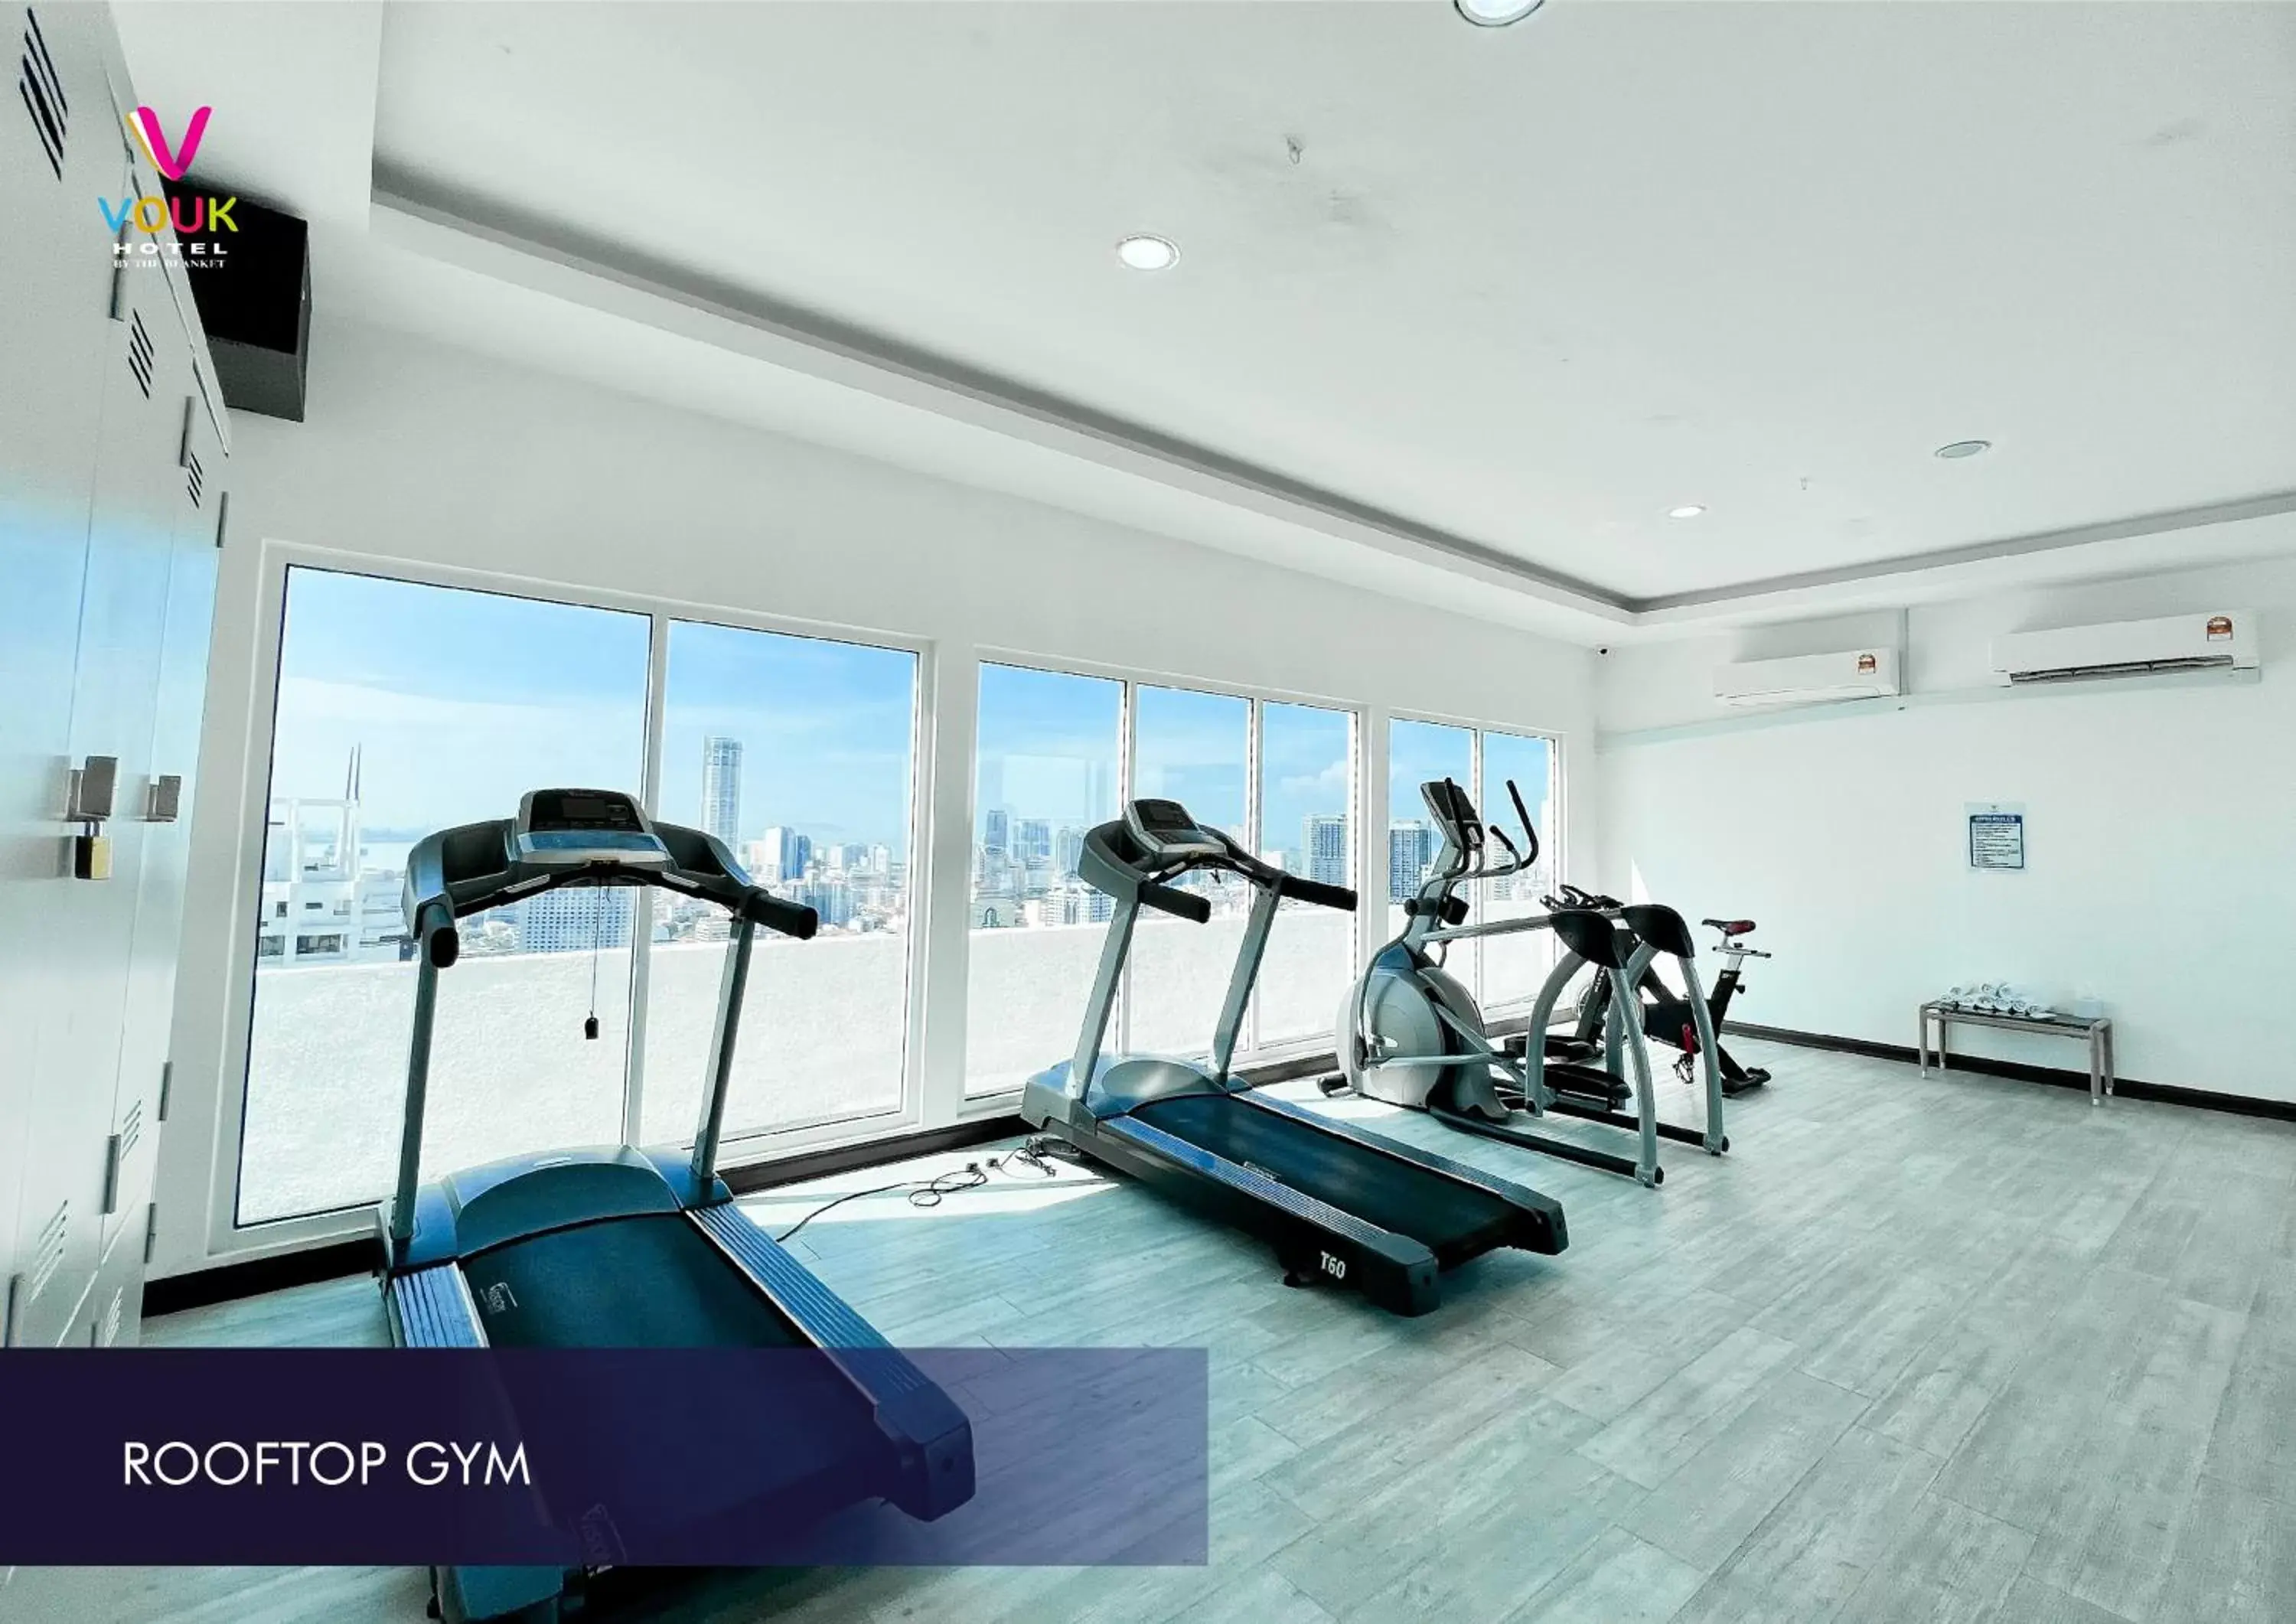 Fitness centre/facilities, Fitness Center/Facilities in Vouk Hotel Suites, Penang